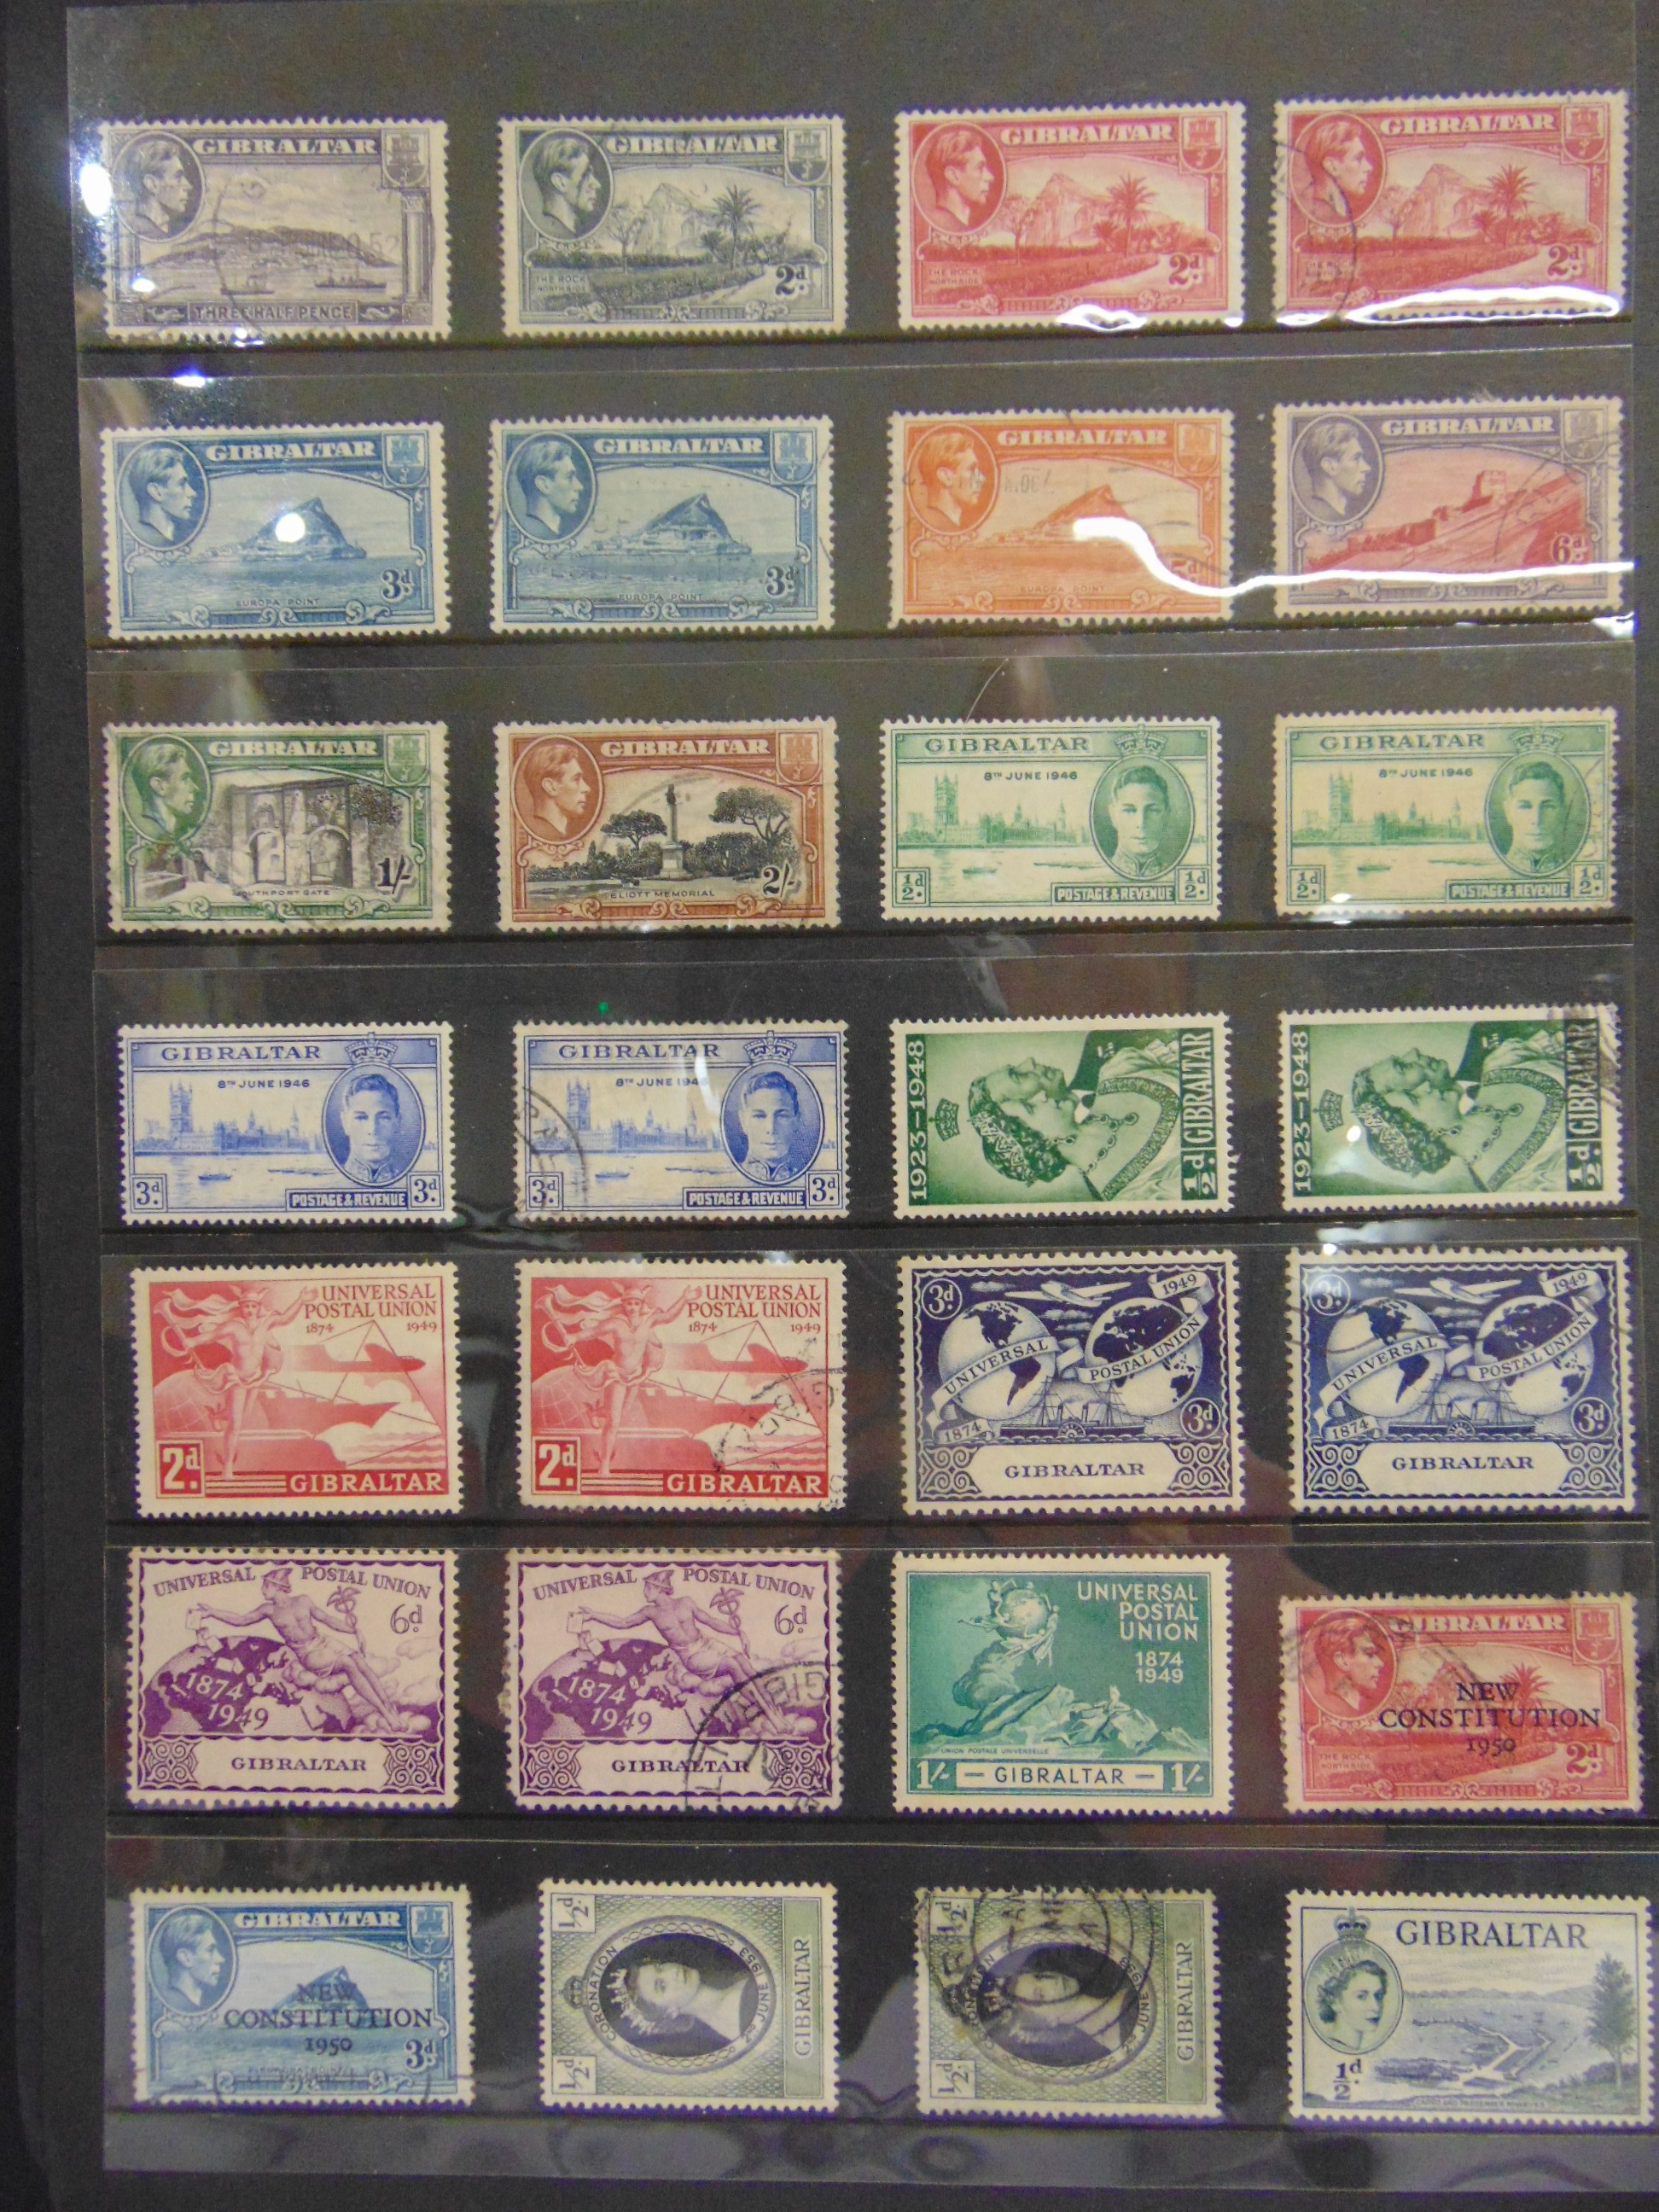 STAMPS - A PART-WORLD COLLECTION including the Falkland Islands, Fiji, The Gambia, Gold Coast / - Image 4 of 12